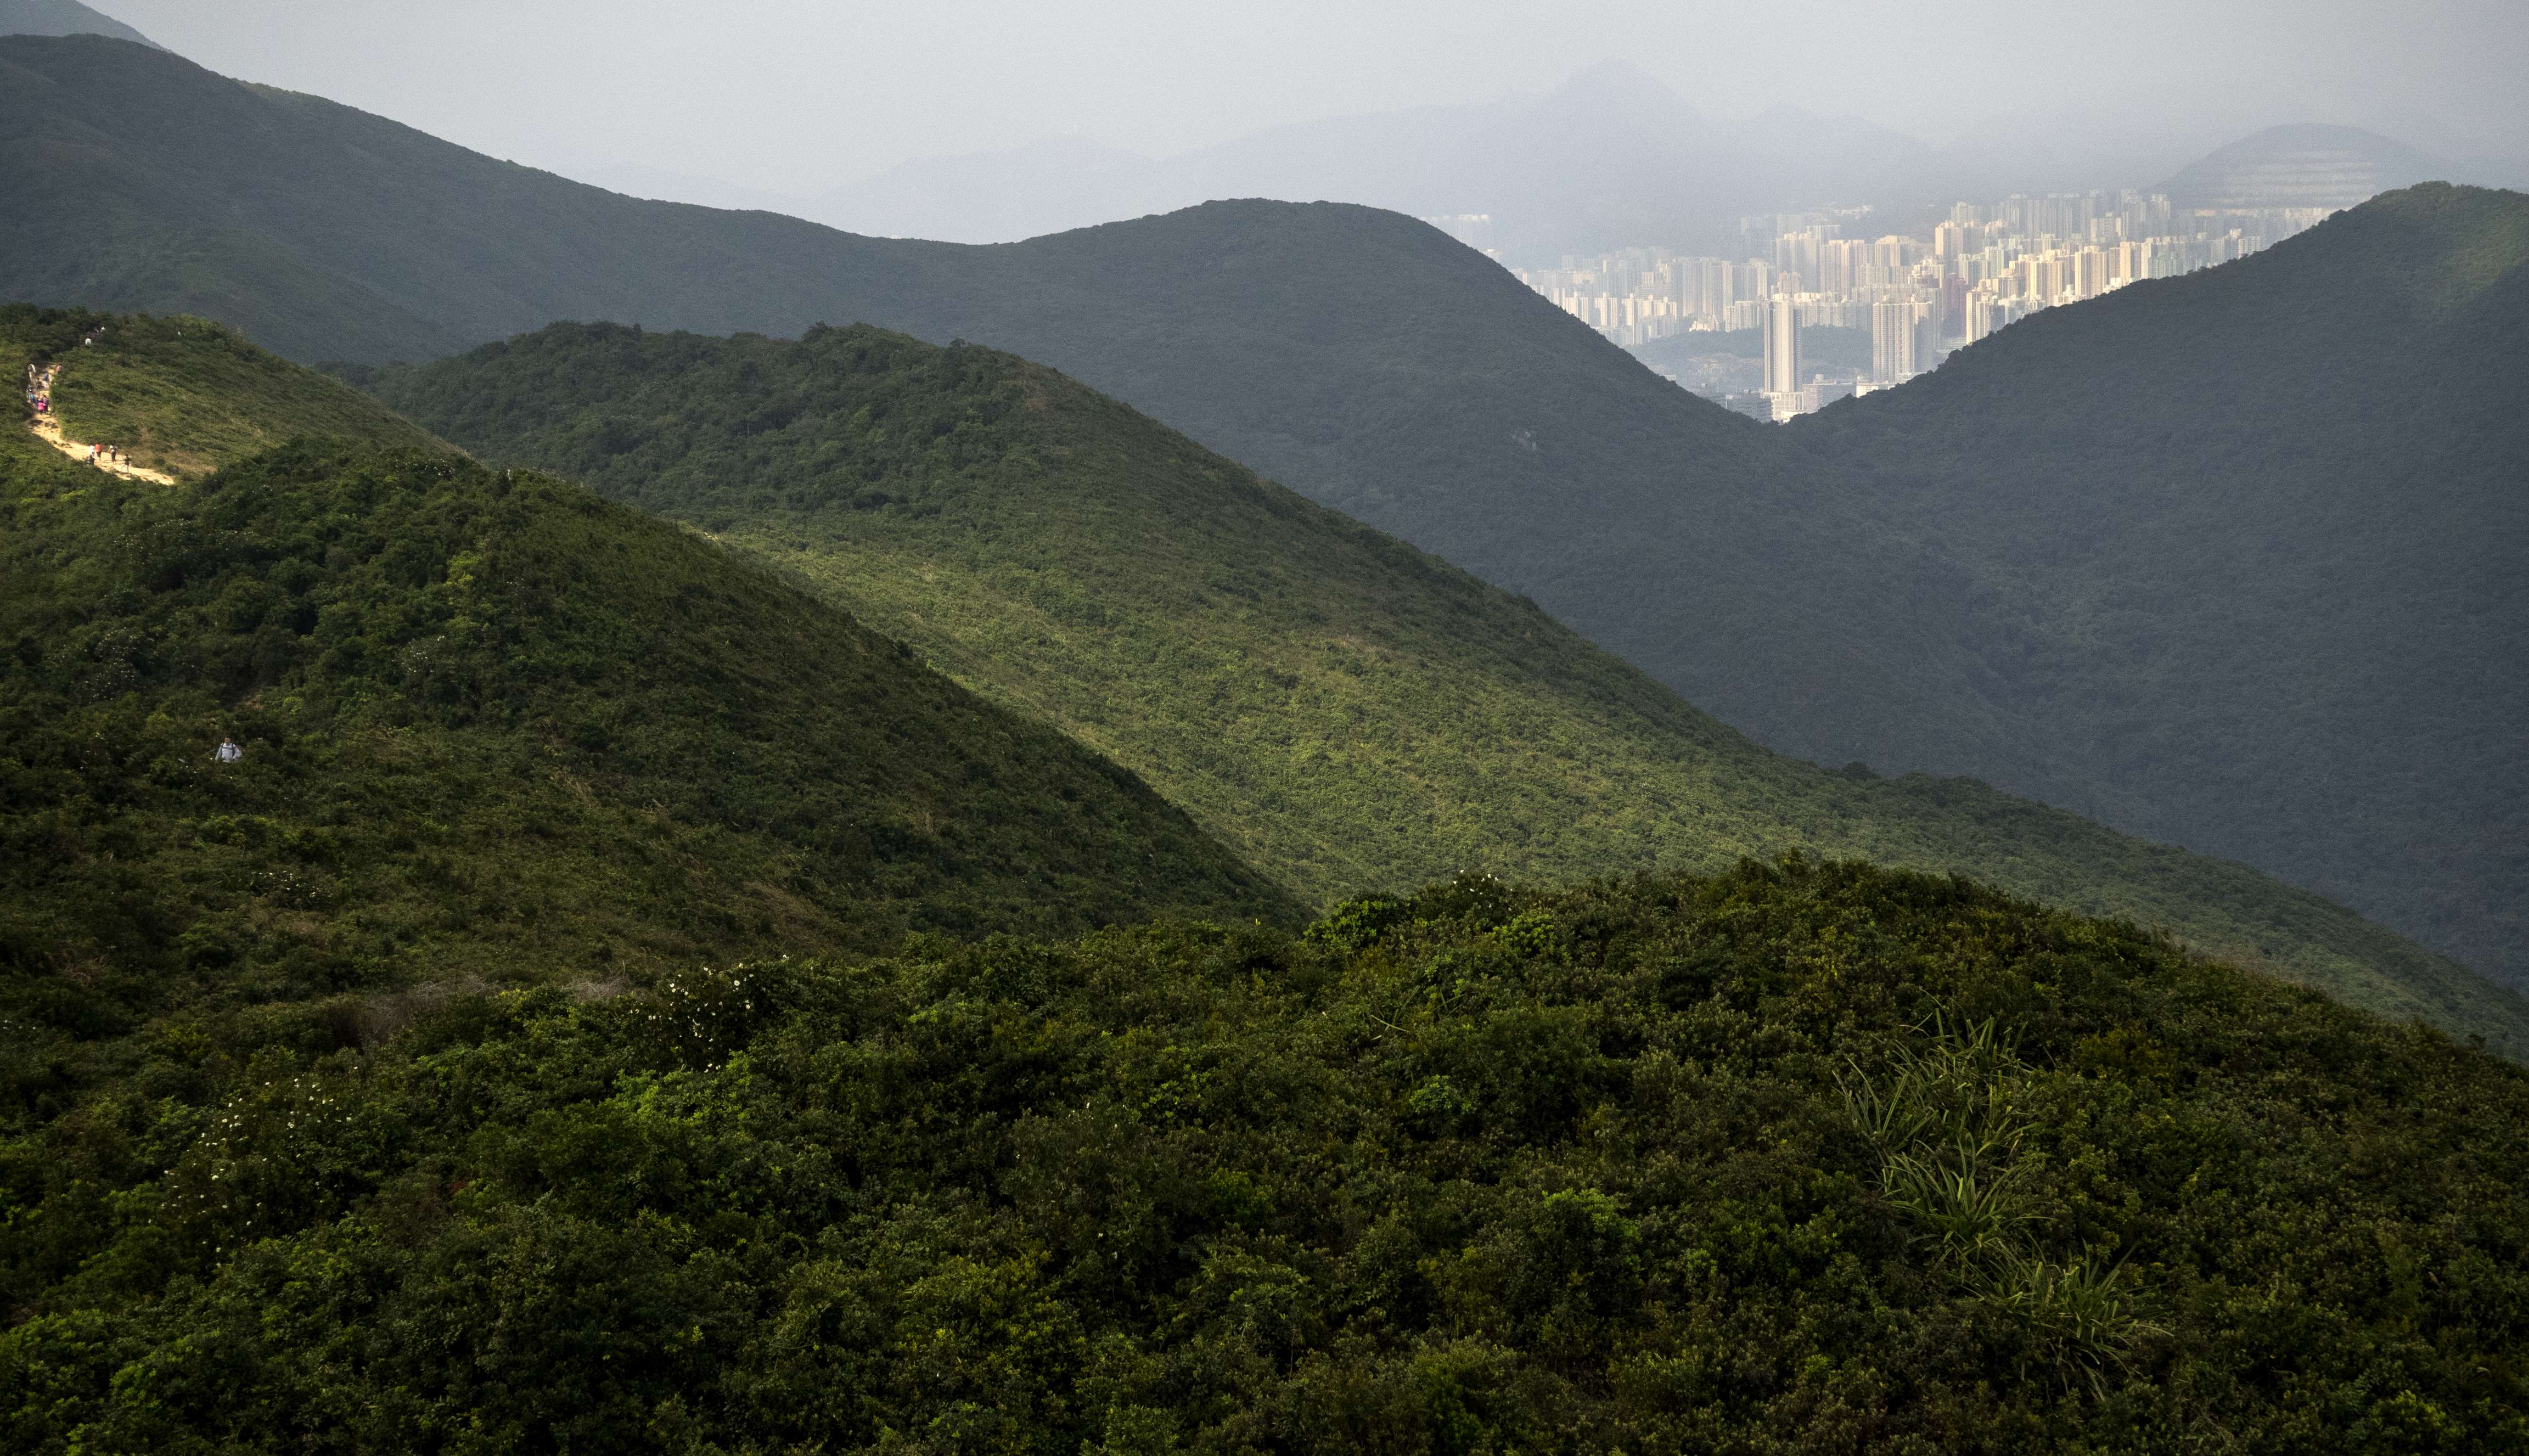 Country parks make up some 40 per cent of Hong Kong’s land. The government has been hesitant in proposing development of the fringe areas of the parks due to opposition from environmental protection groups. Photo: Martin Chan